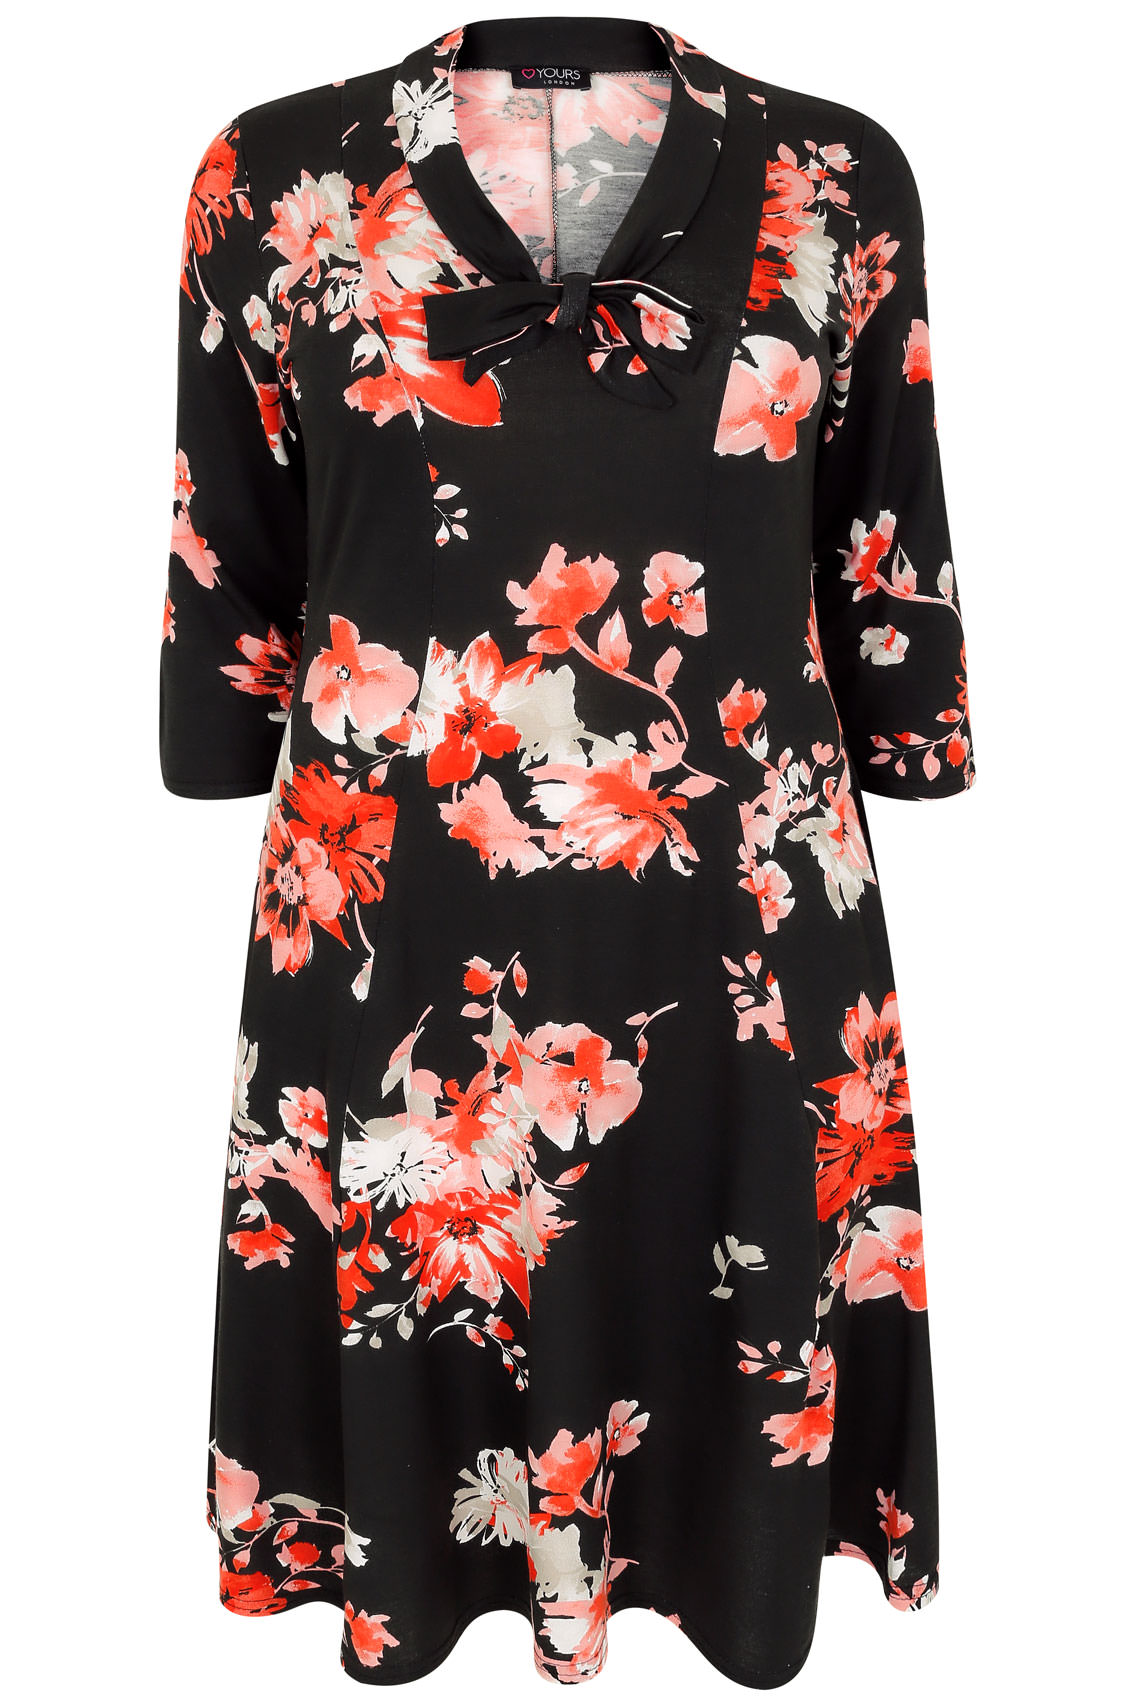 Black & Coral Floral Print Dress With Pussy Bow, Plus size 16 to 36